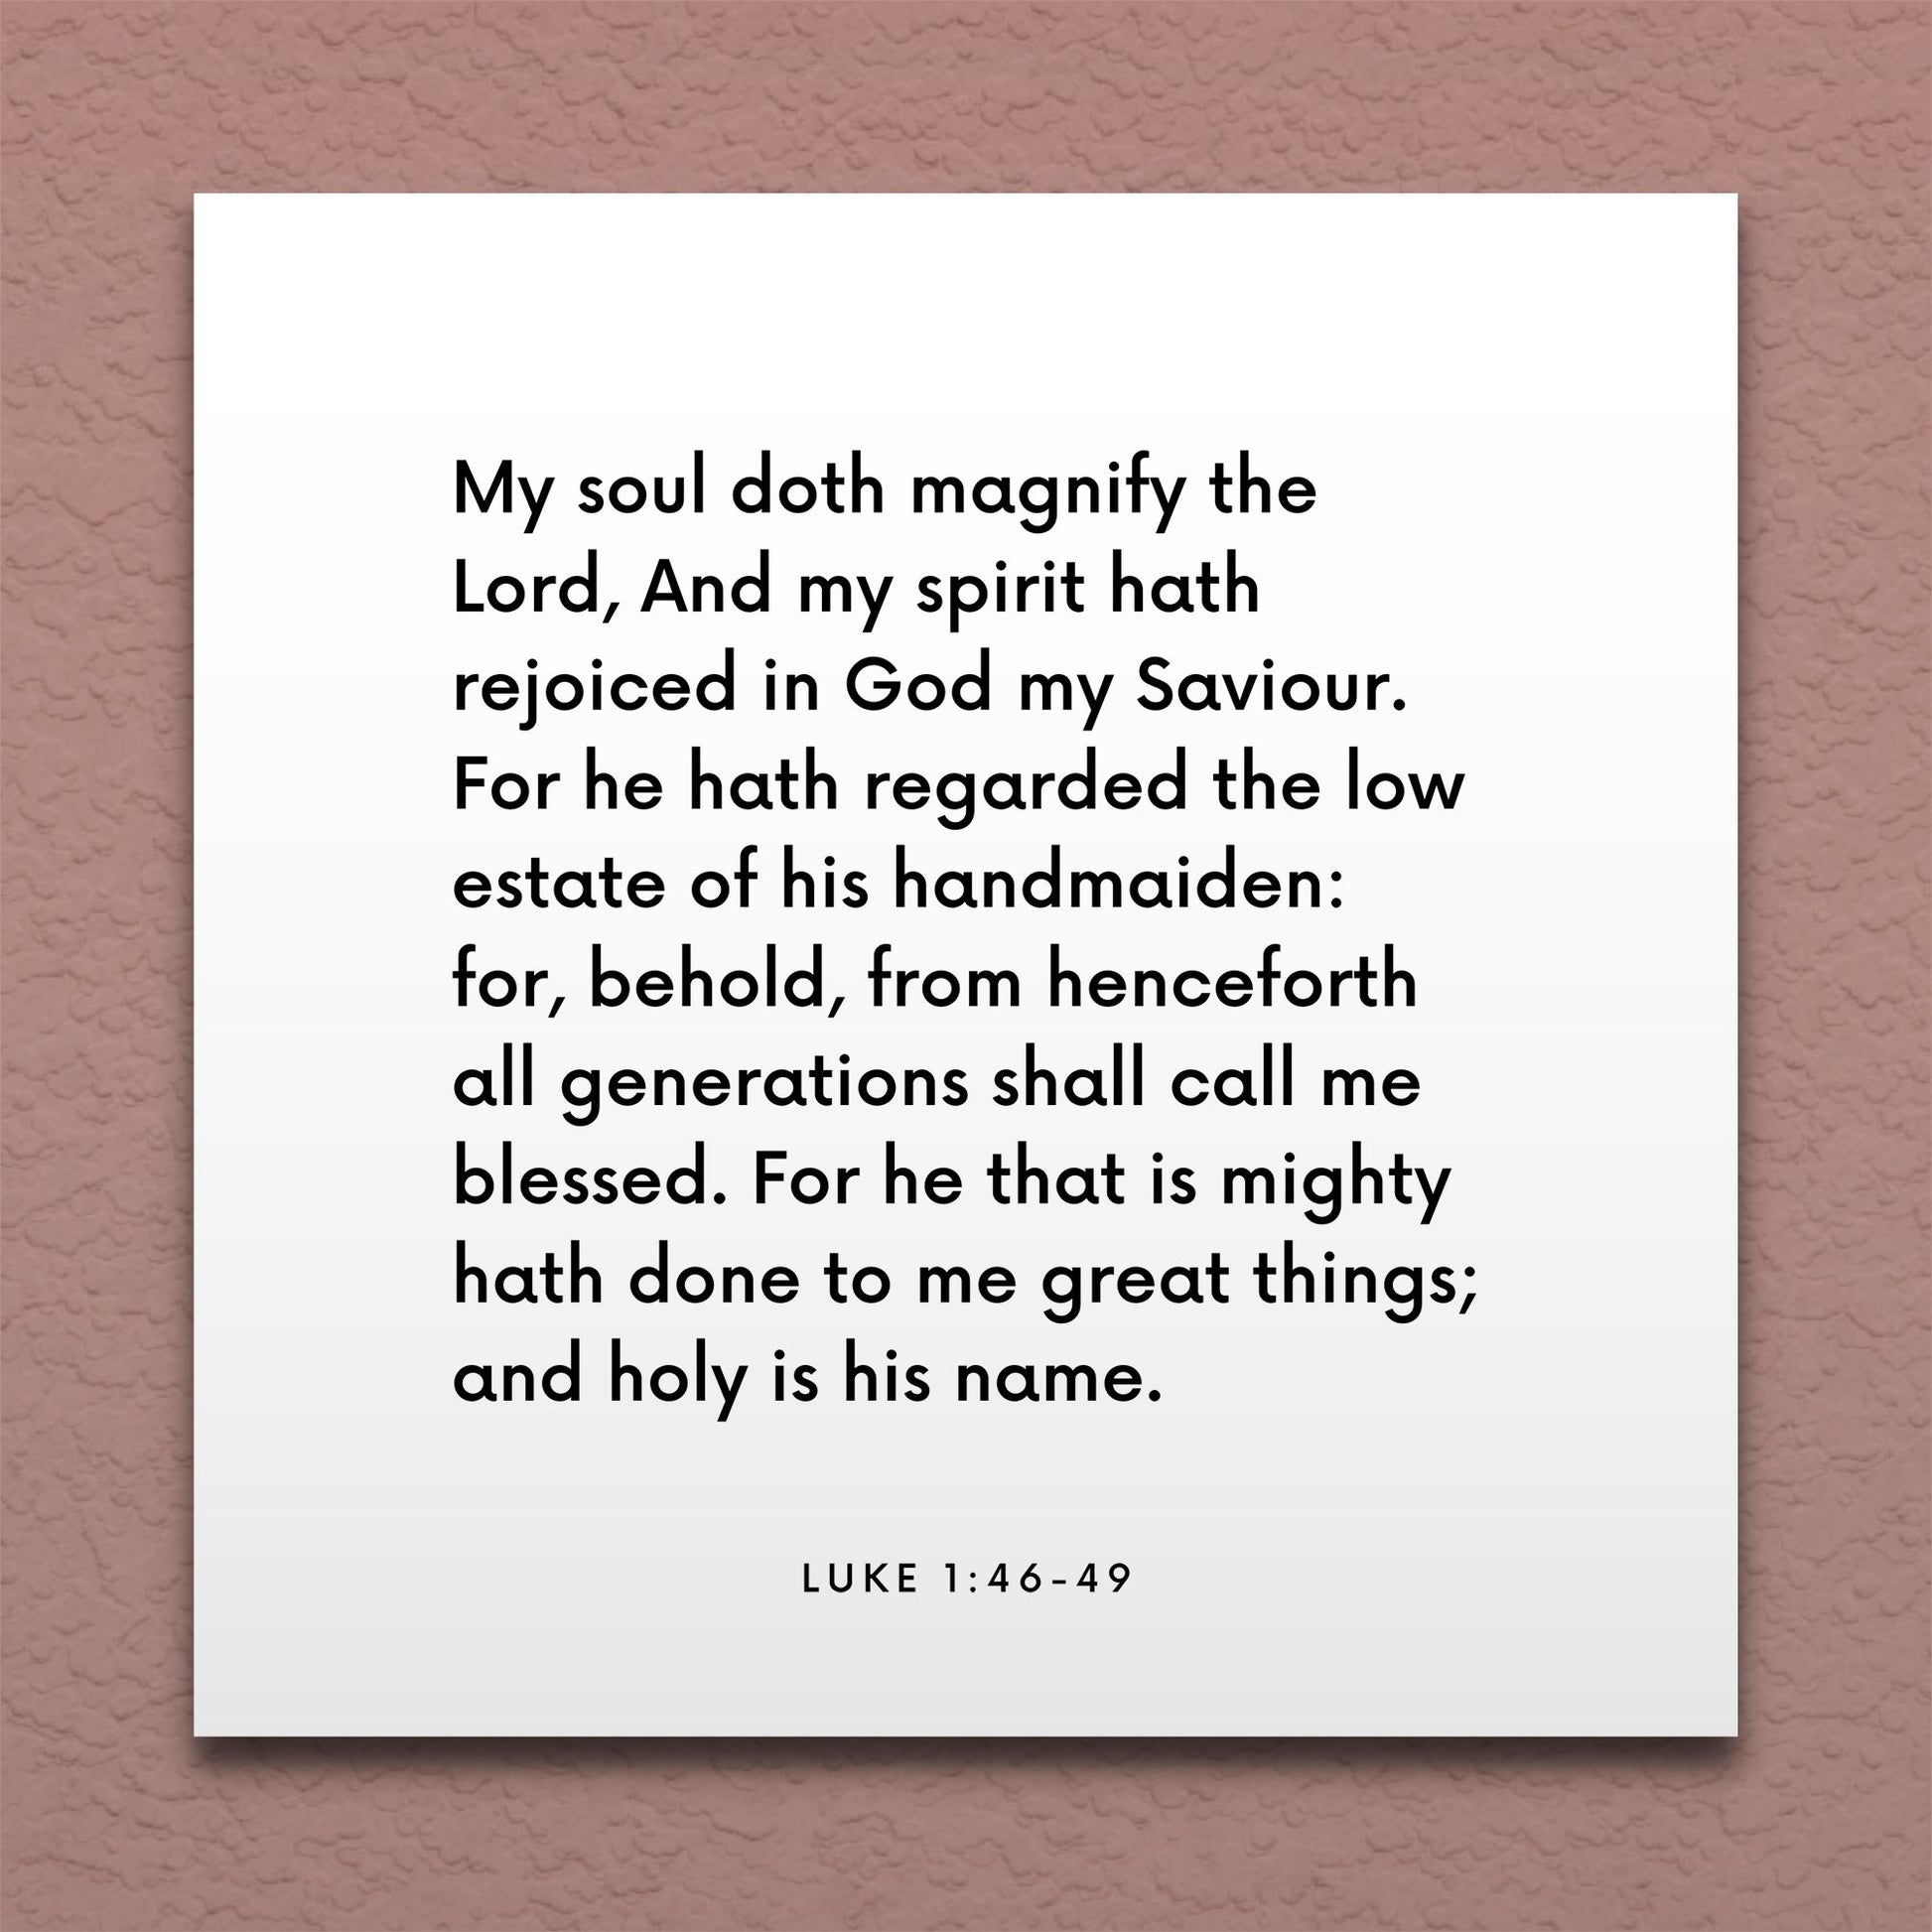 Wall-mounted scripture tile for Luke 1:46-49 - "My soul doth magnify the Lord"